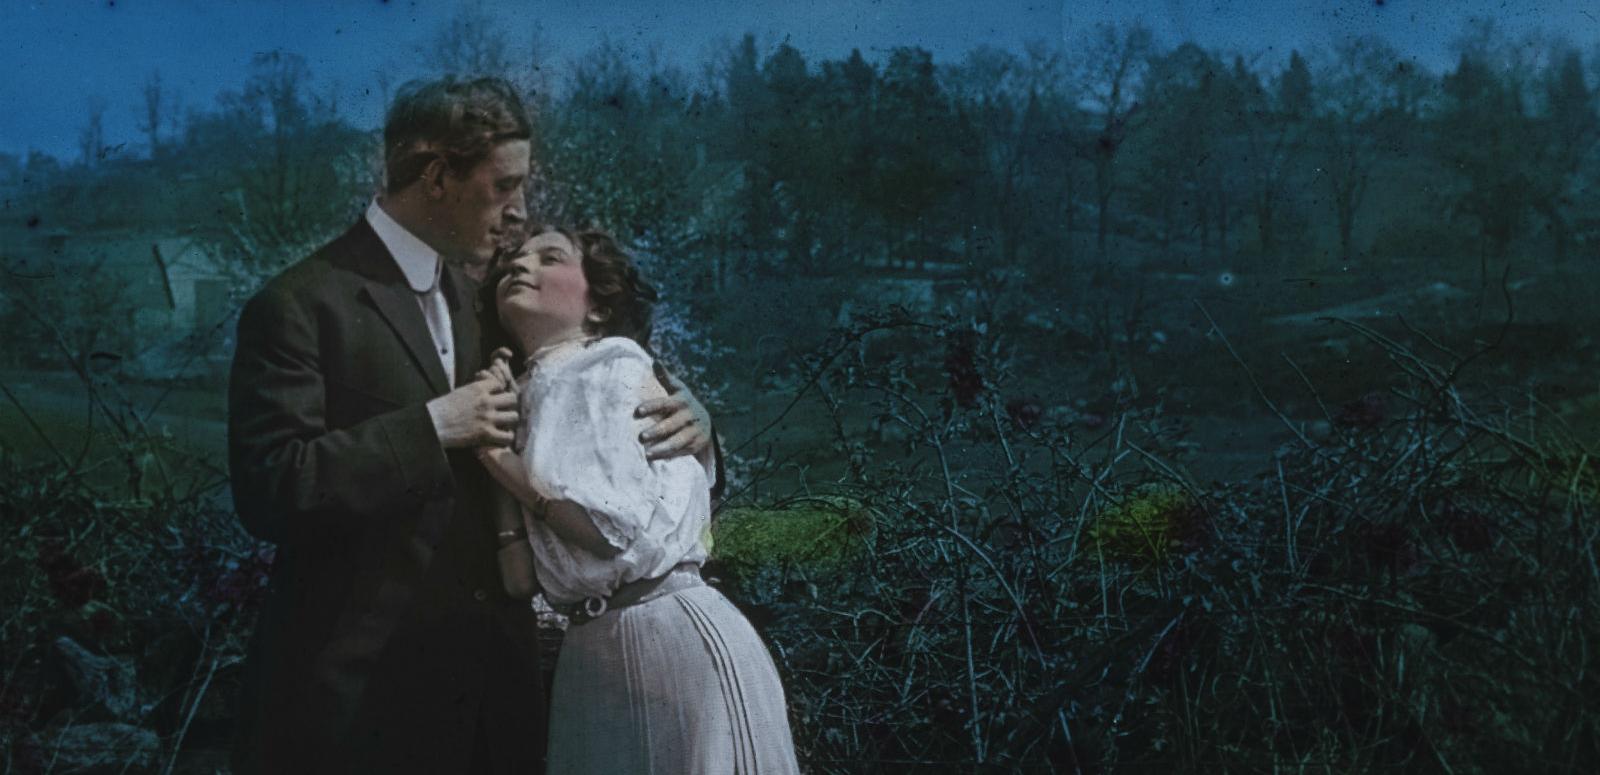 Glass slide image of a man and woman in an embrace standing in the moonlight, circa 1906.